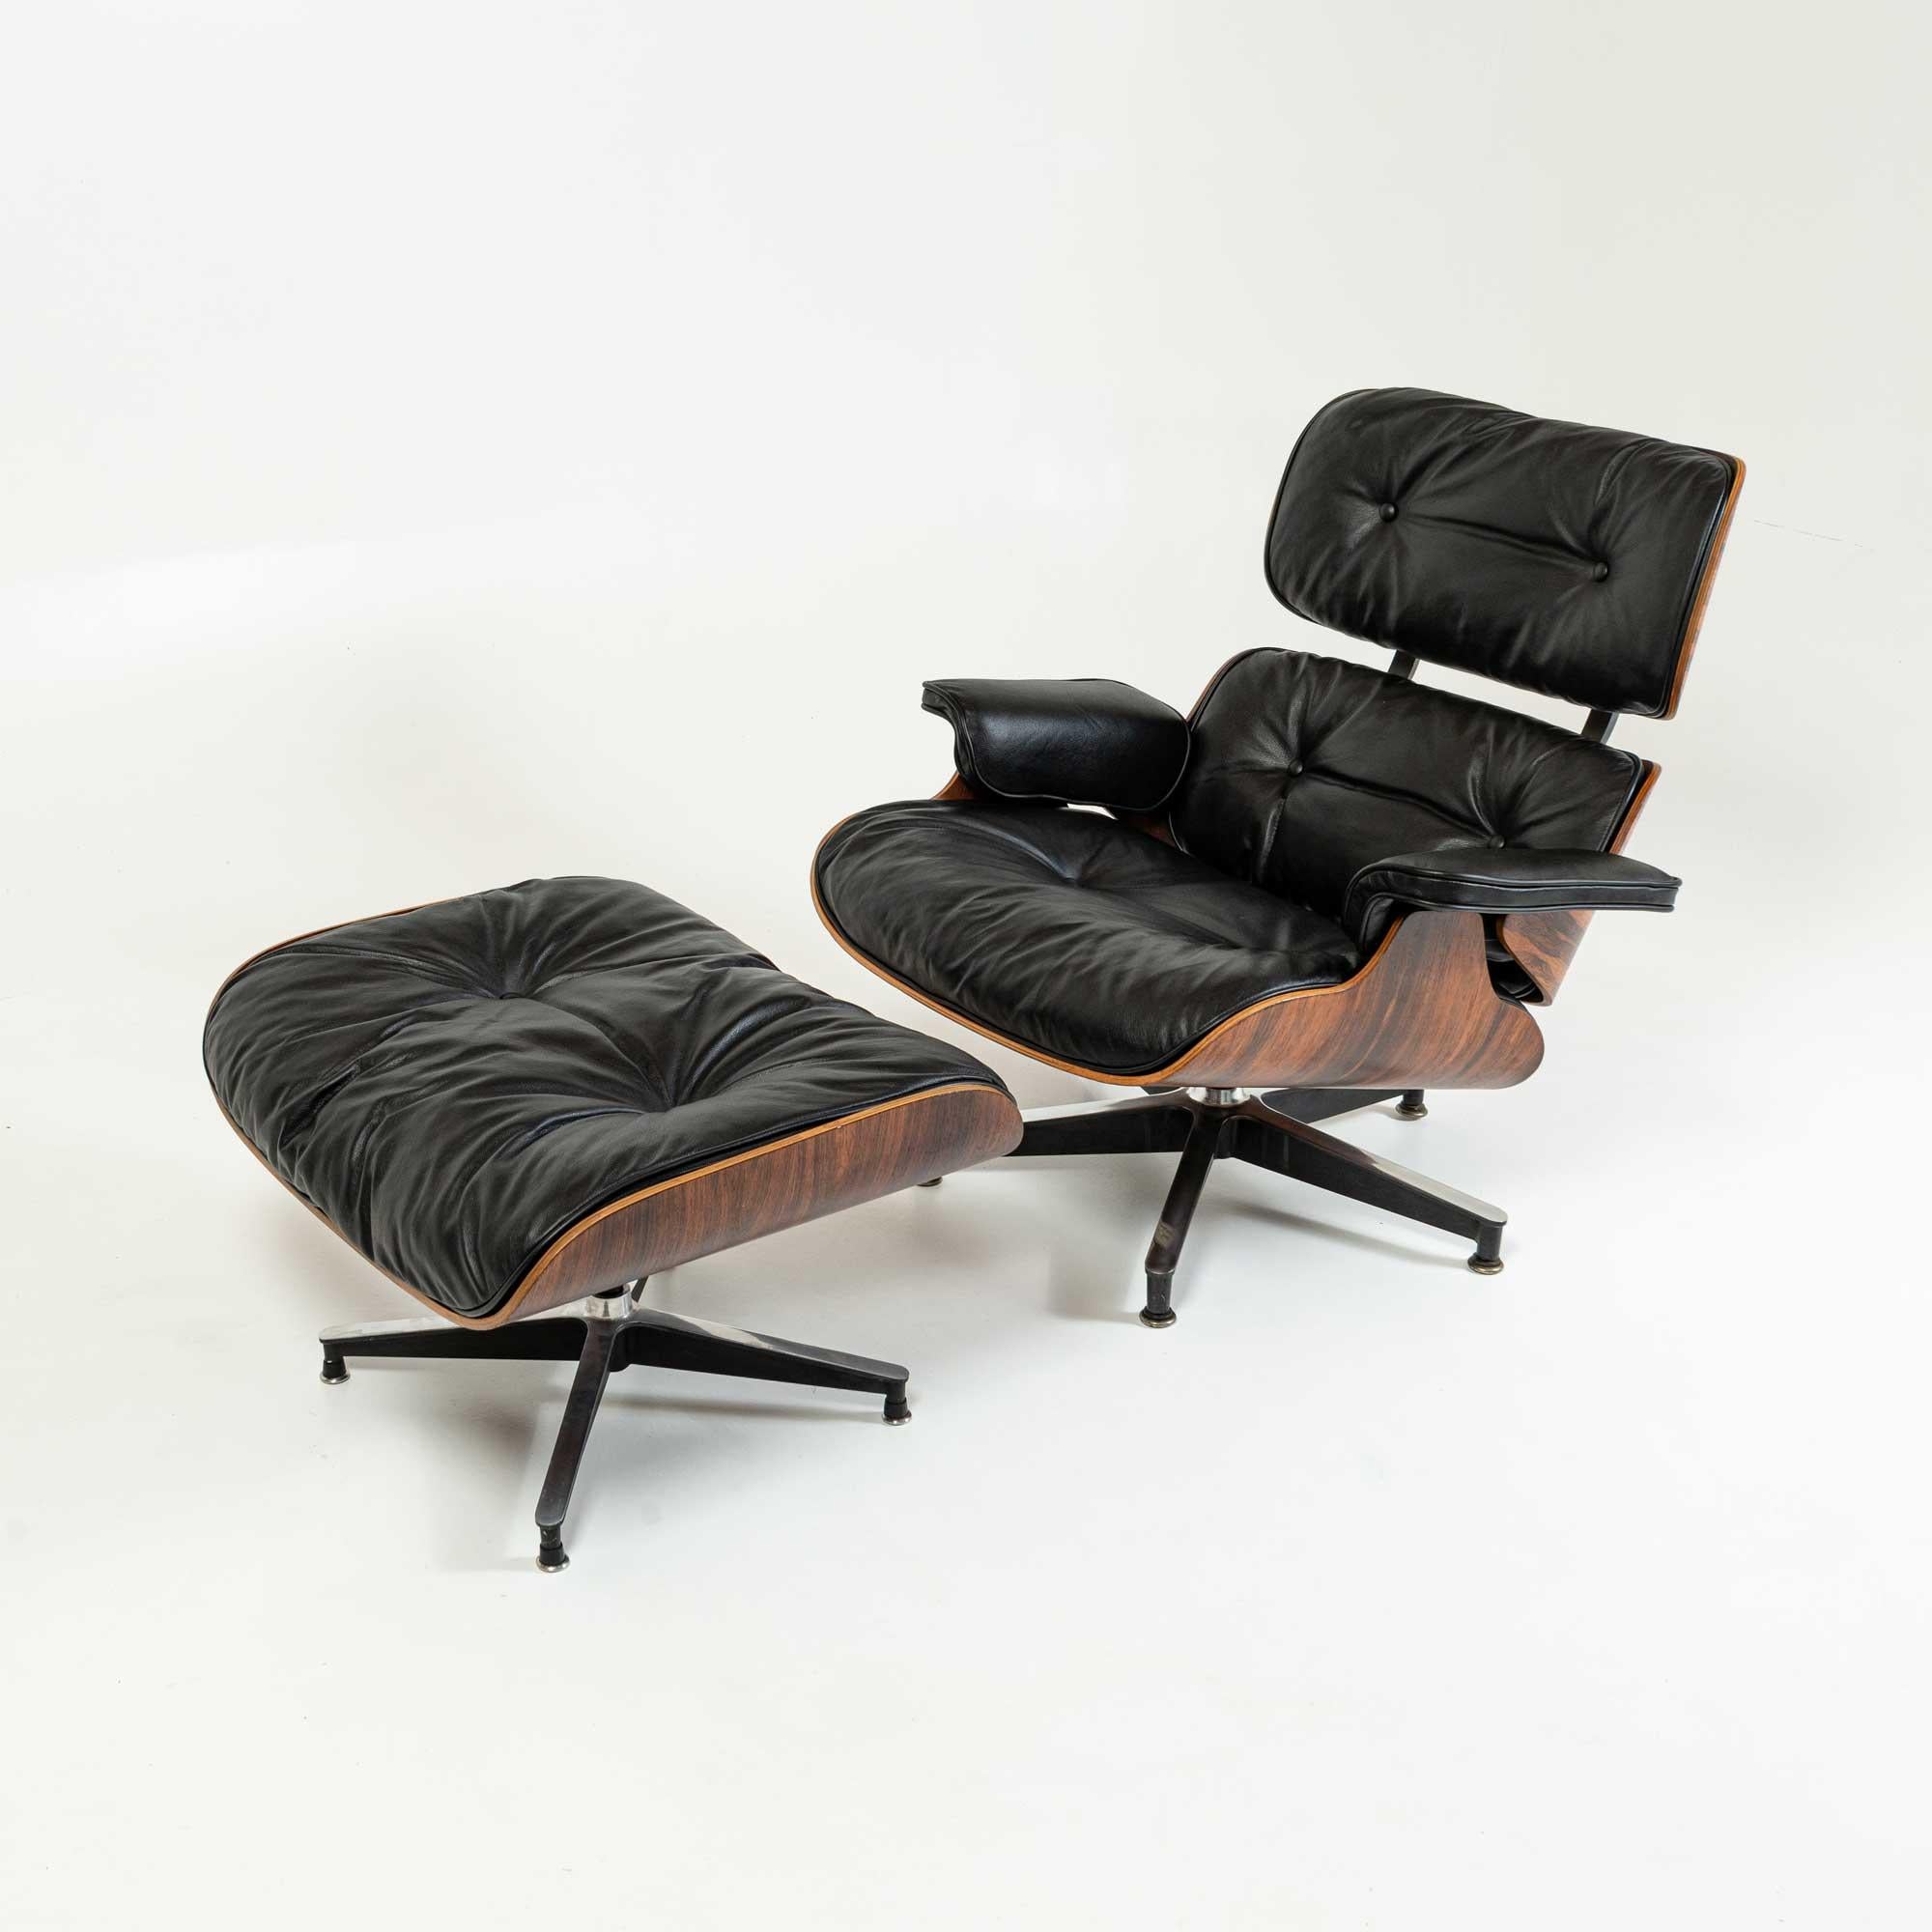 North American Exceptional Grain Restored First Gen 1956 Eames Lounge Chair & Ottoman